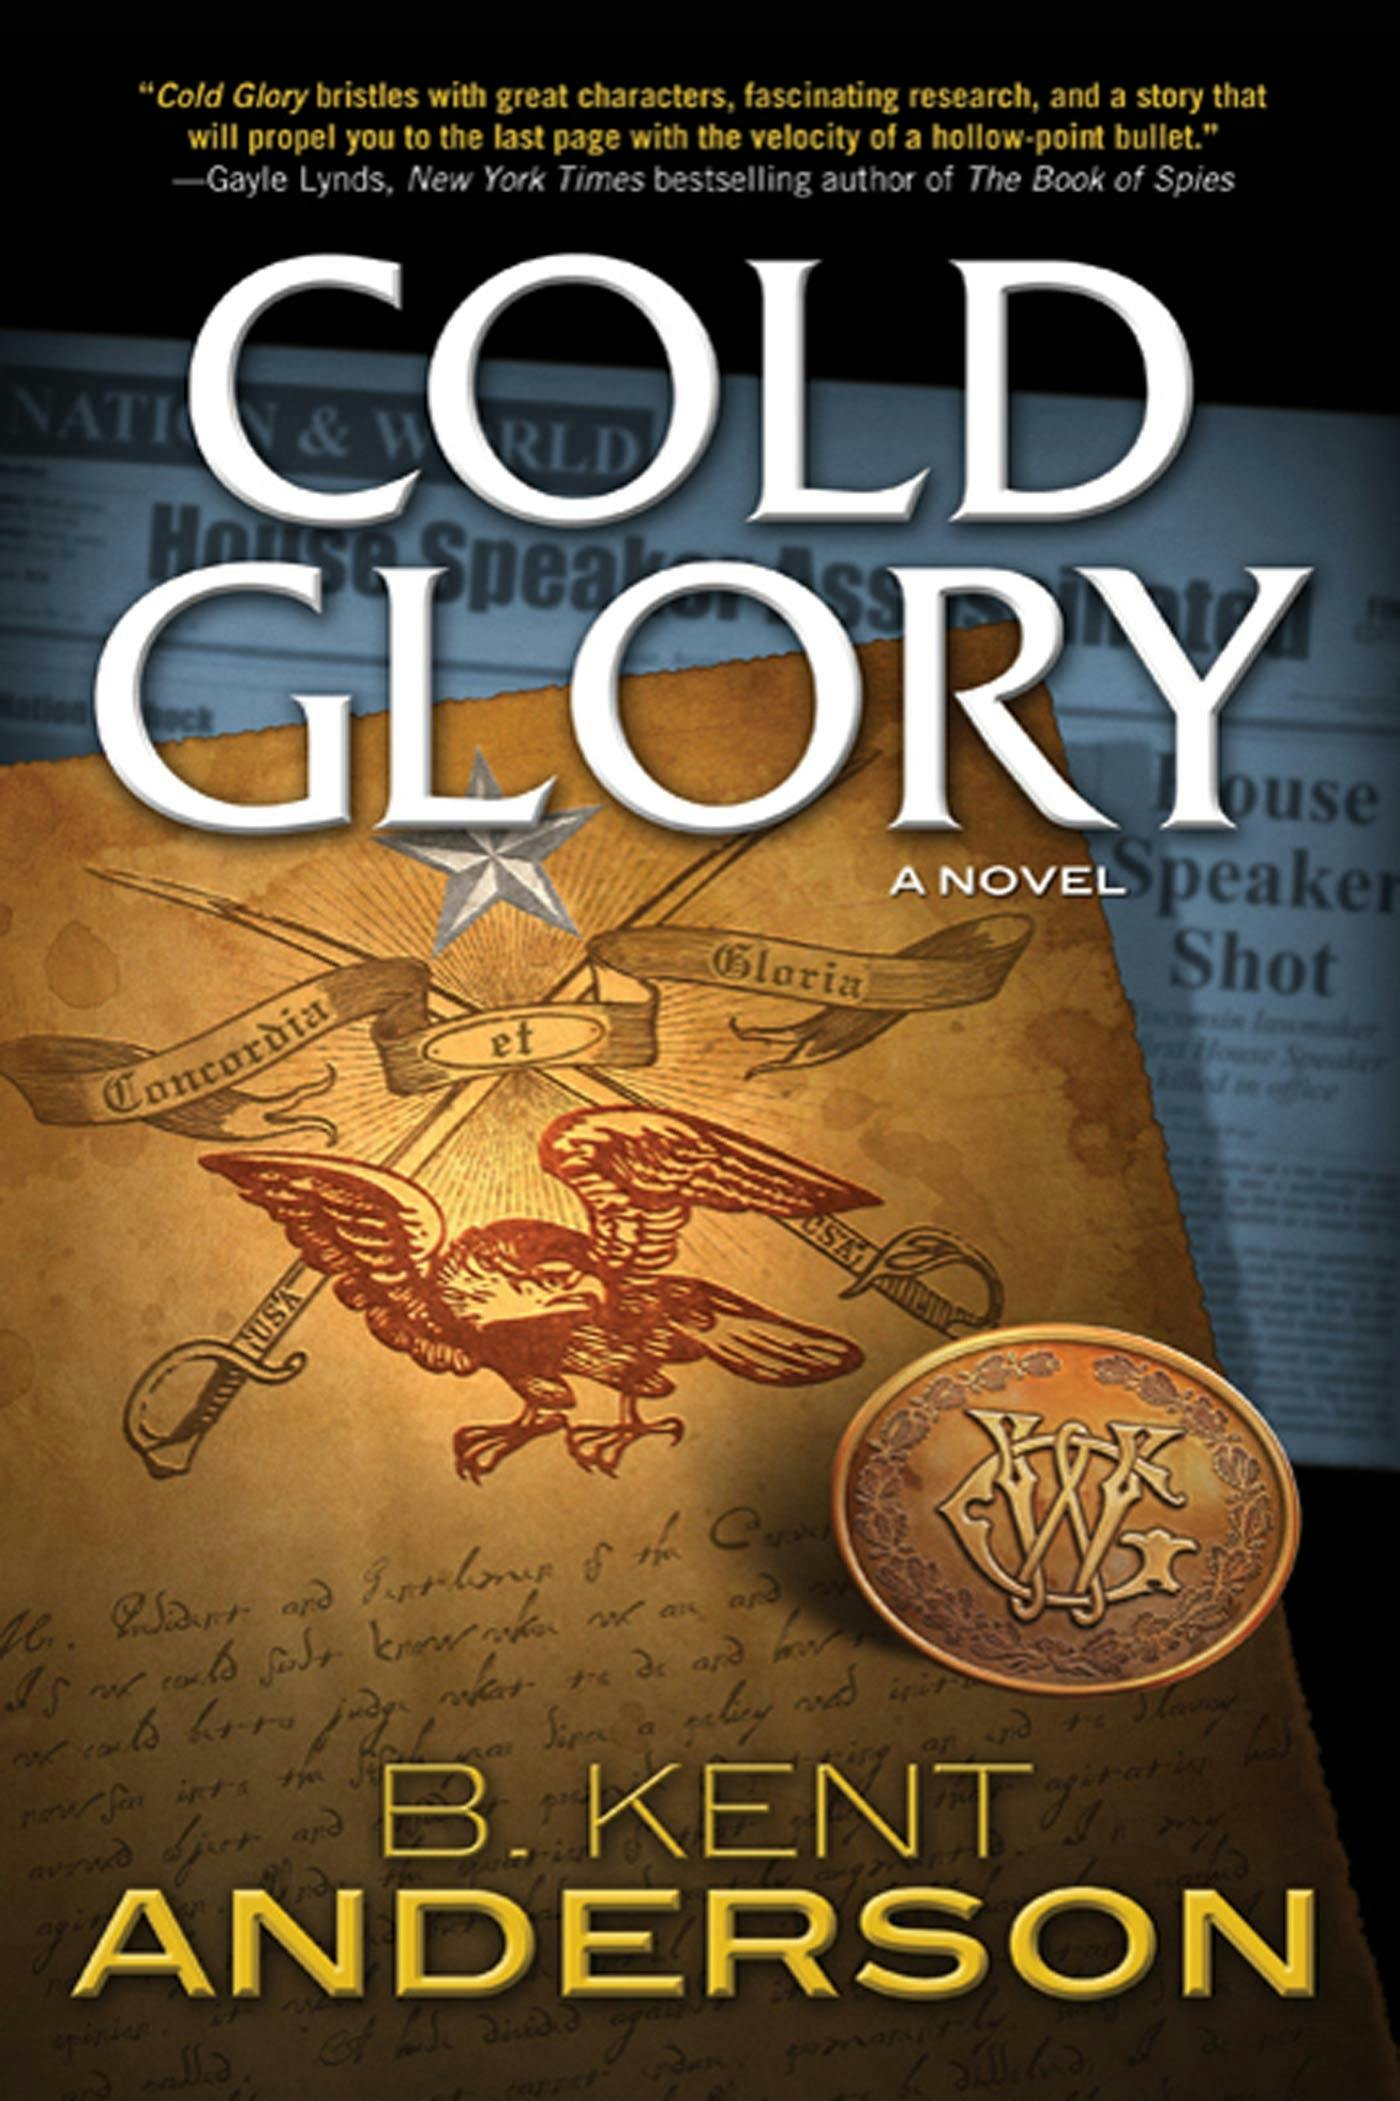 Cover for the book titled as: Cold Glory